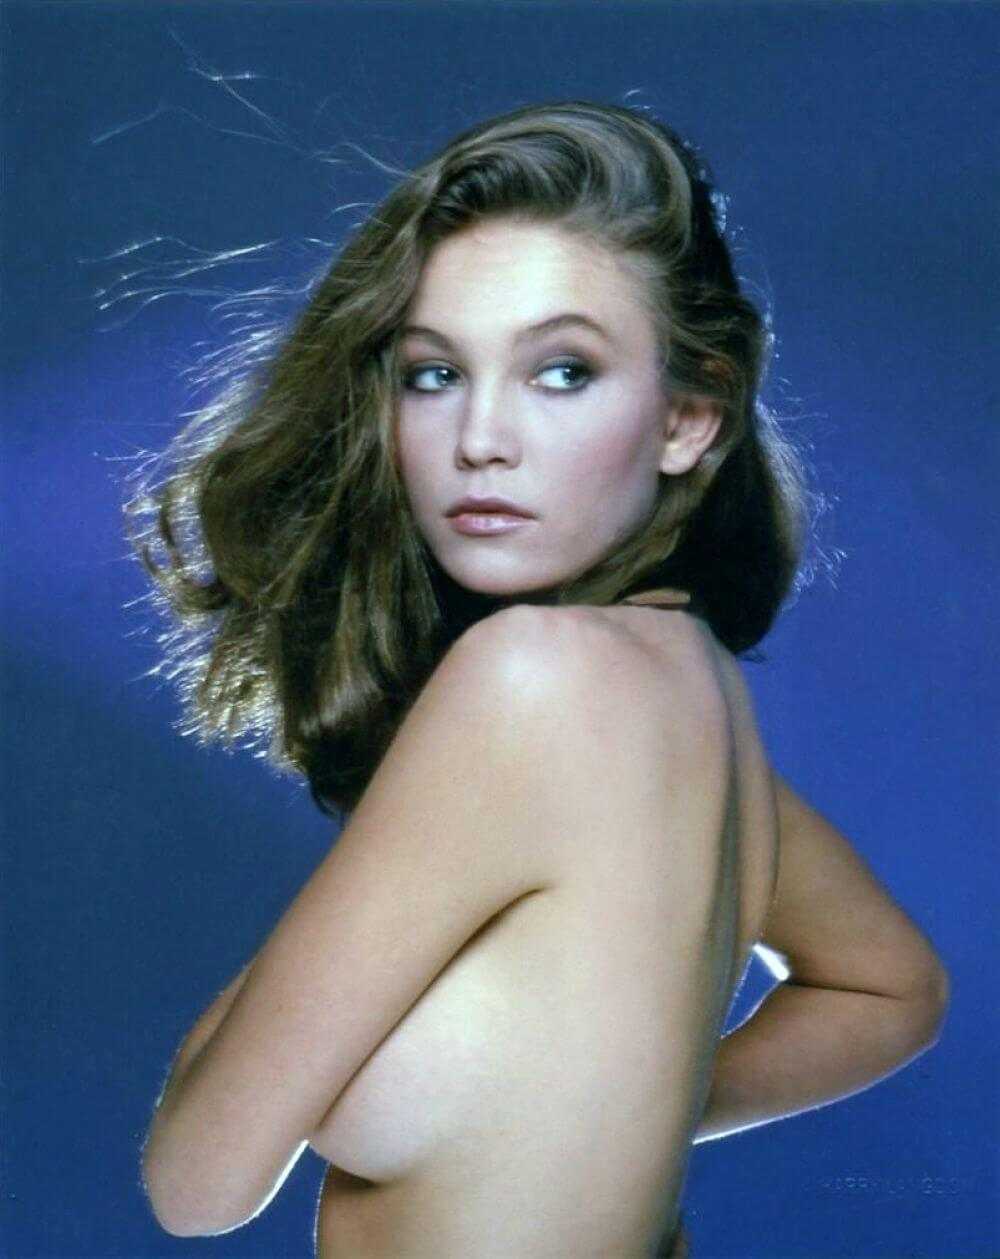 50 Nude Pictures Of Diane Lane Are A Charm For Her Fans